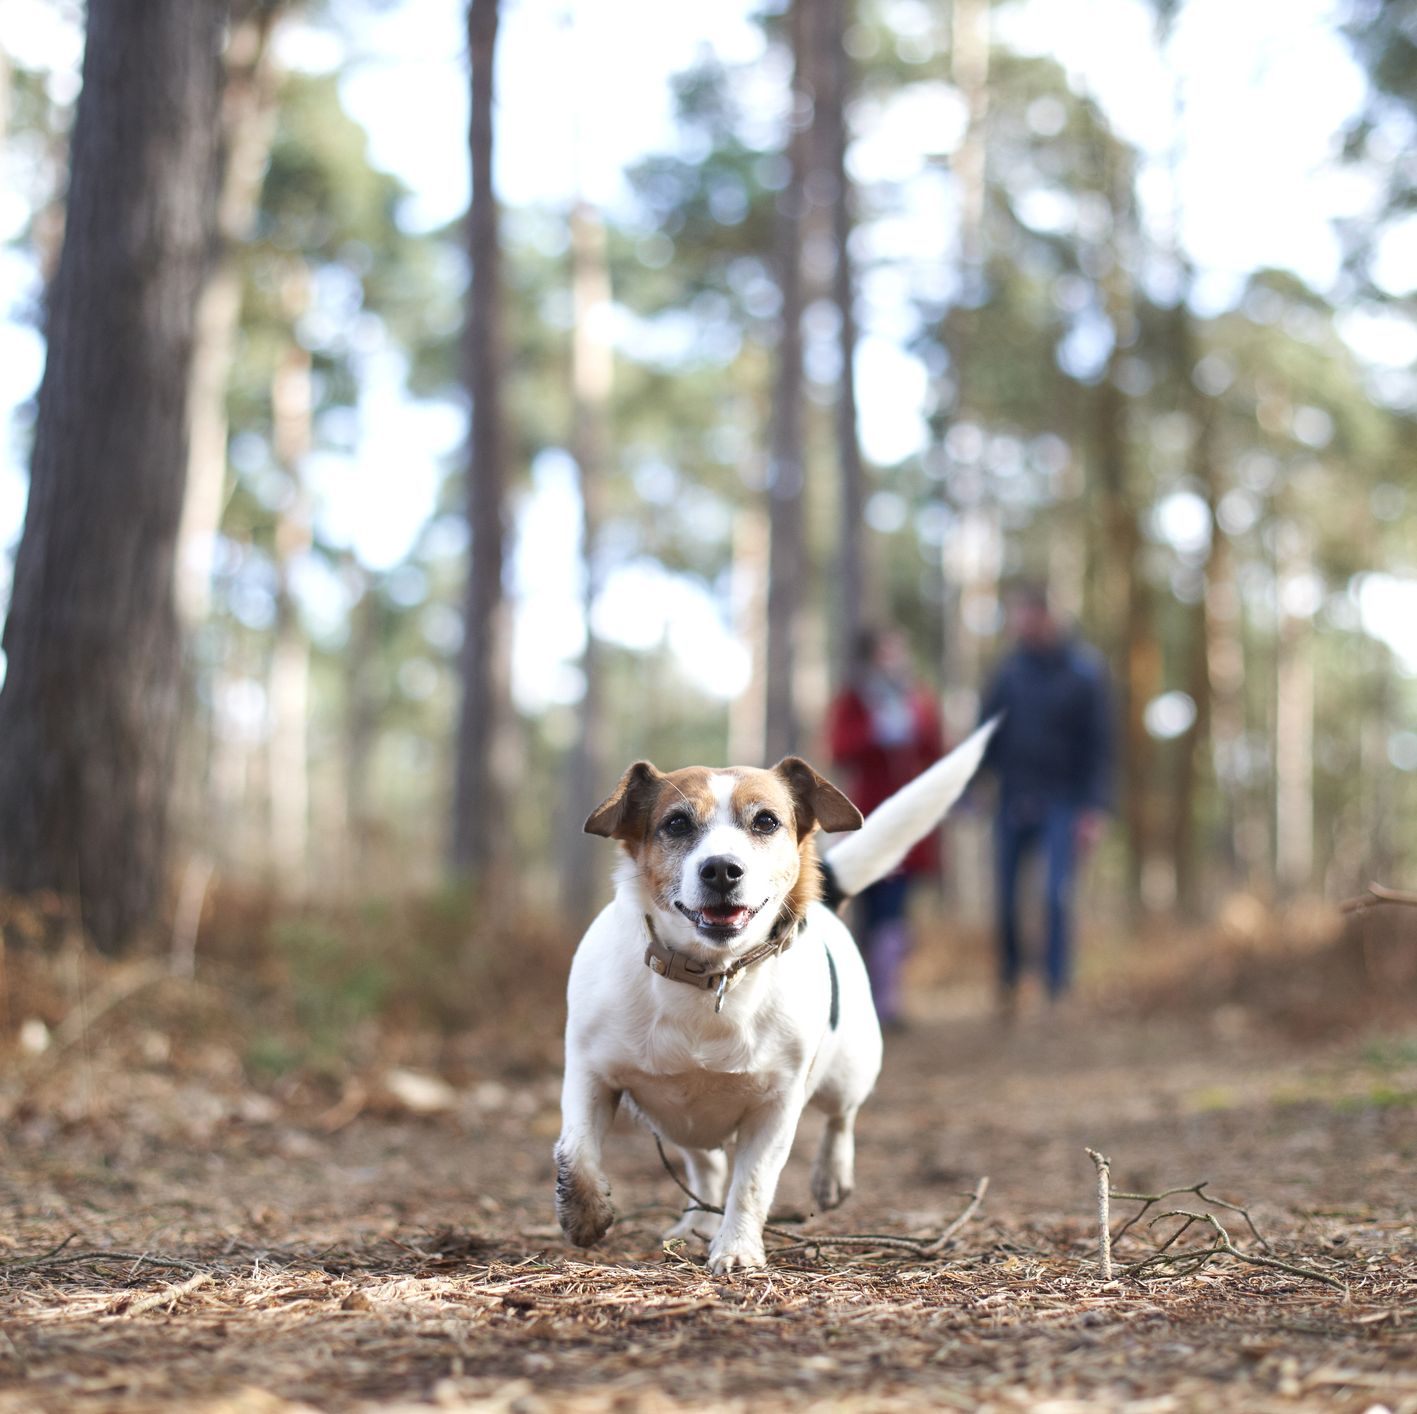 owners can walk their dogs more than once a day, says new government advice